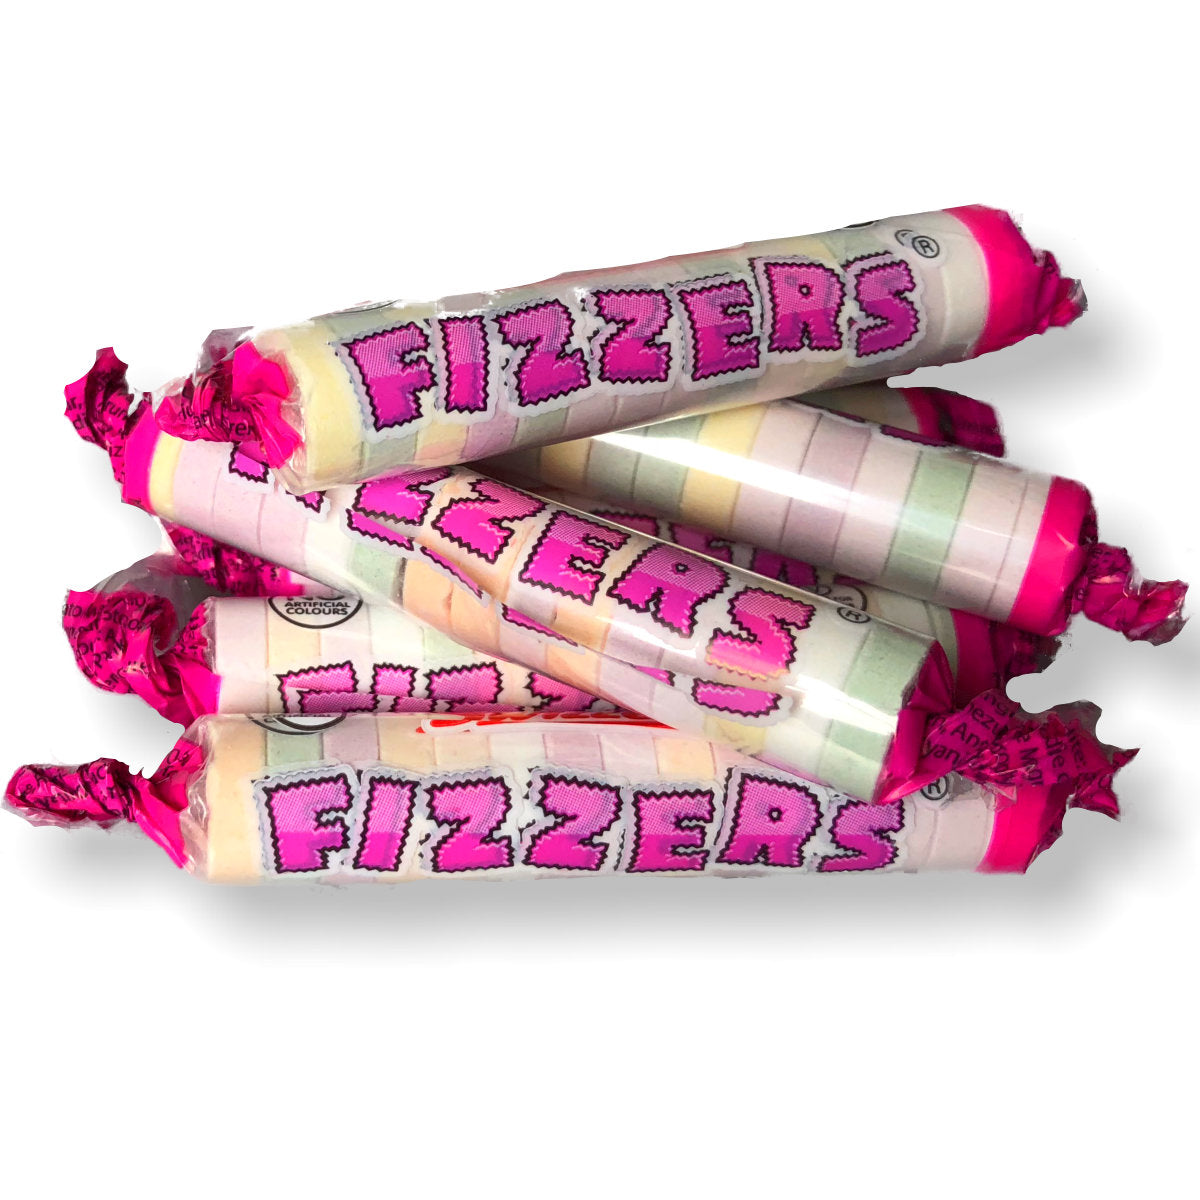 Swizzels Fizzers Fizzles Retro Sweet Shop Traditional Old Fashioned Candy